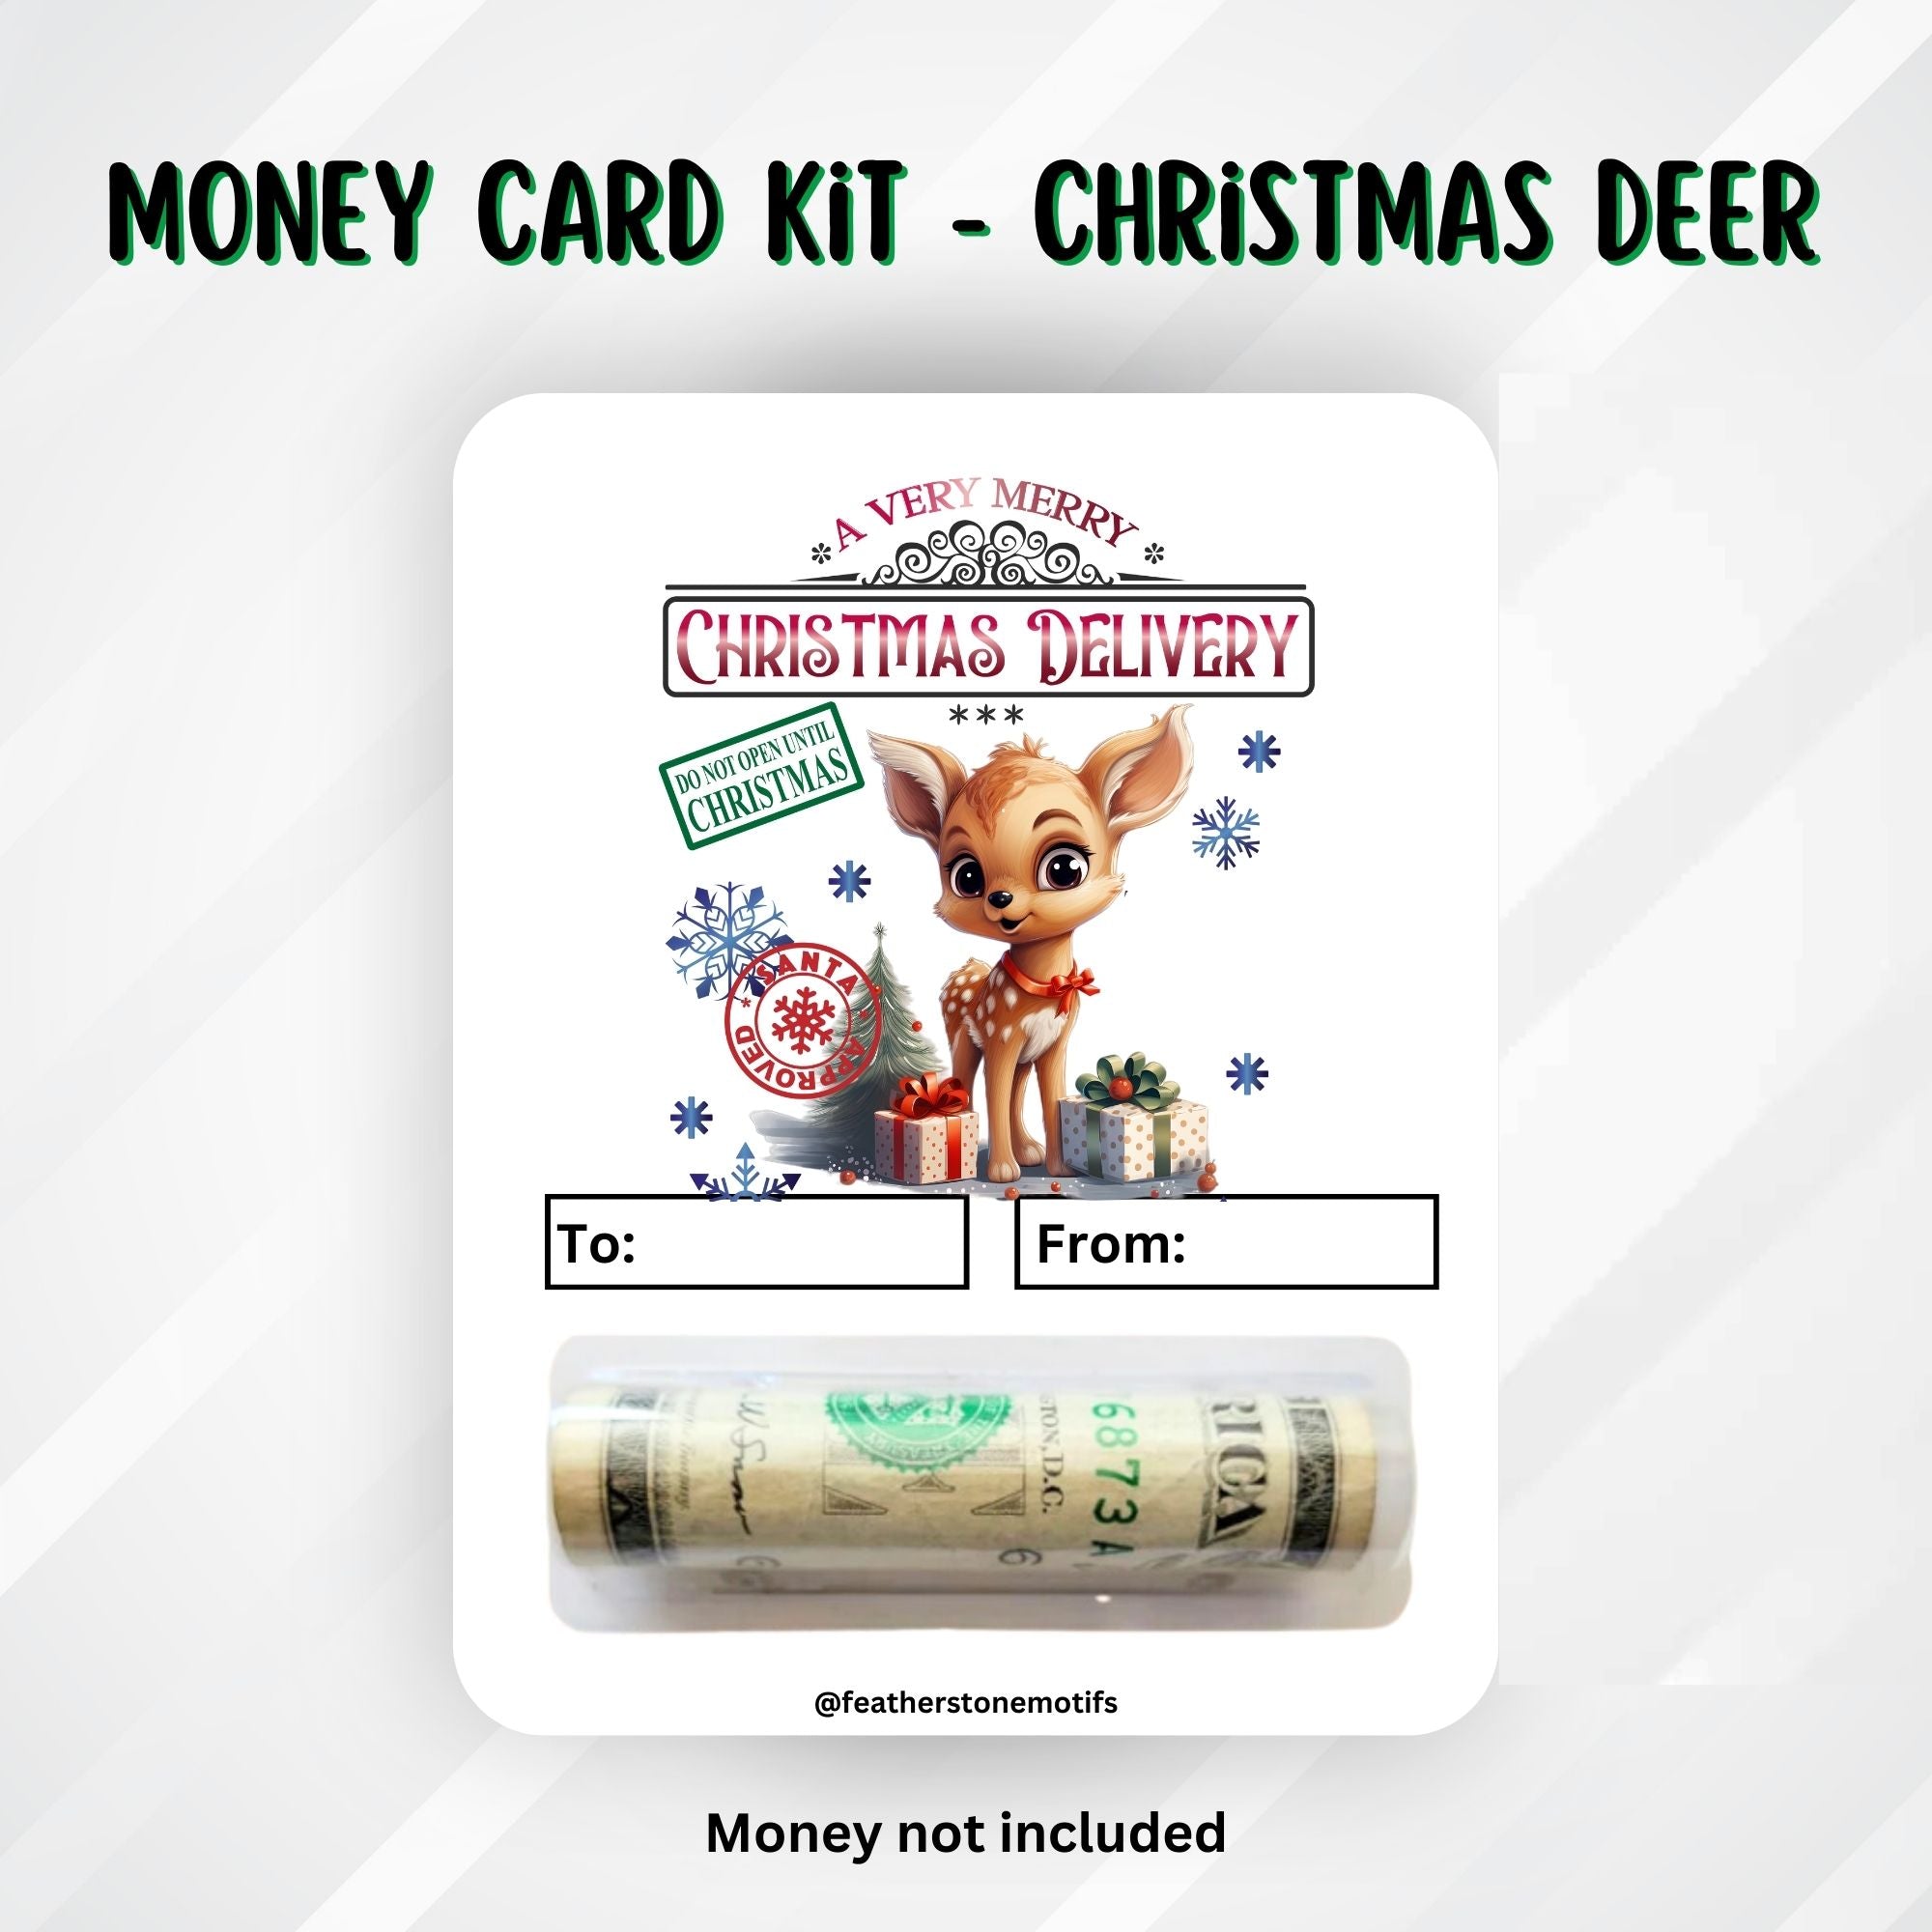 This image shows the money tube attached to the Christmas Deer Money Card.